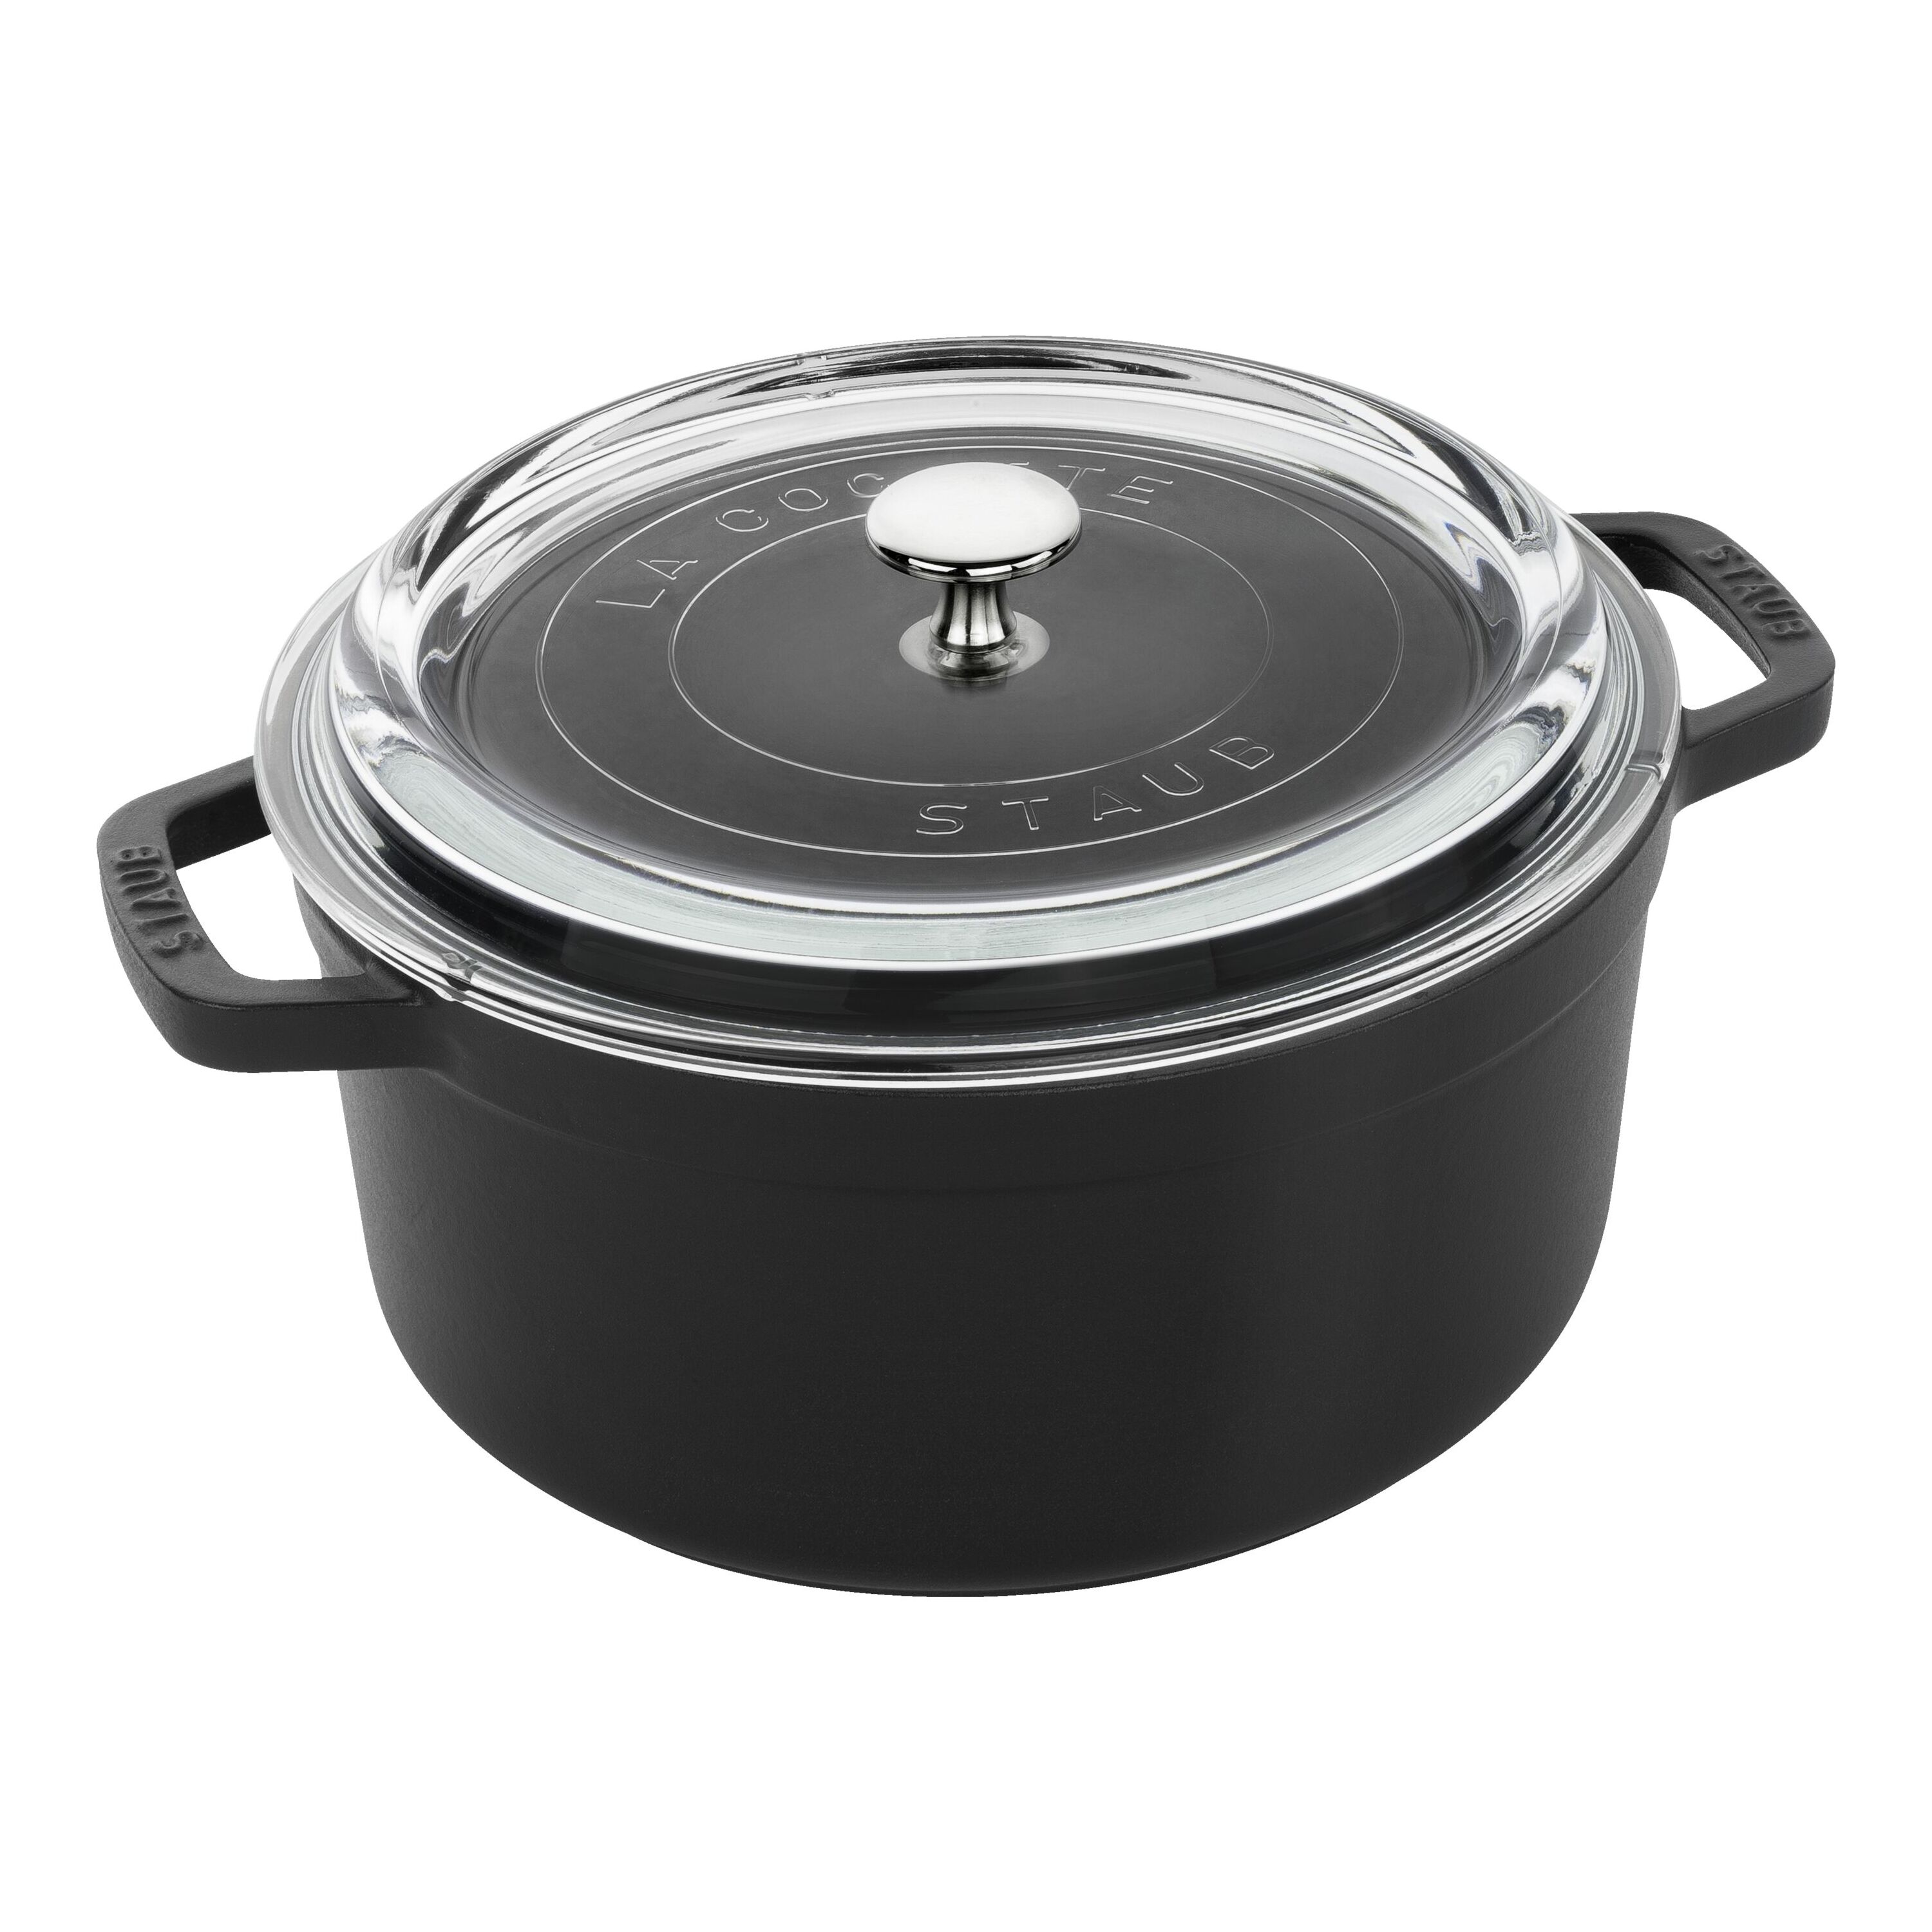 Staub Cooking pot 24 cm with pan and lid 3 el.